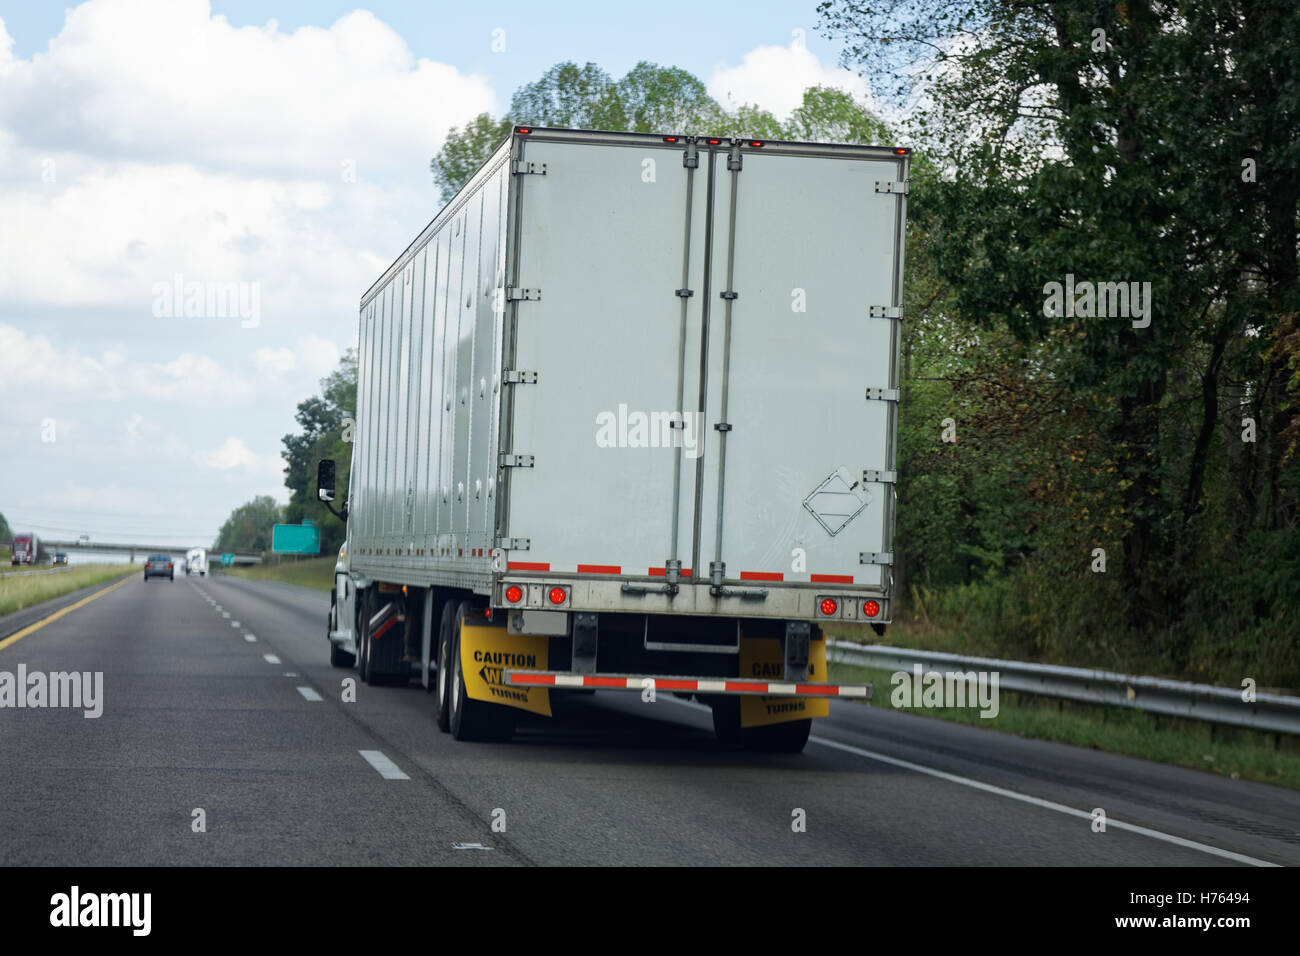 Rear view of semi truck on highway Stock Photo